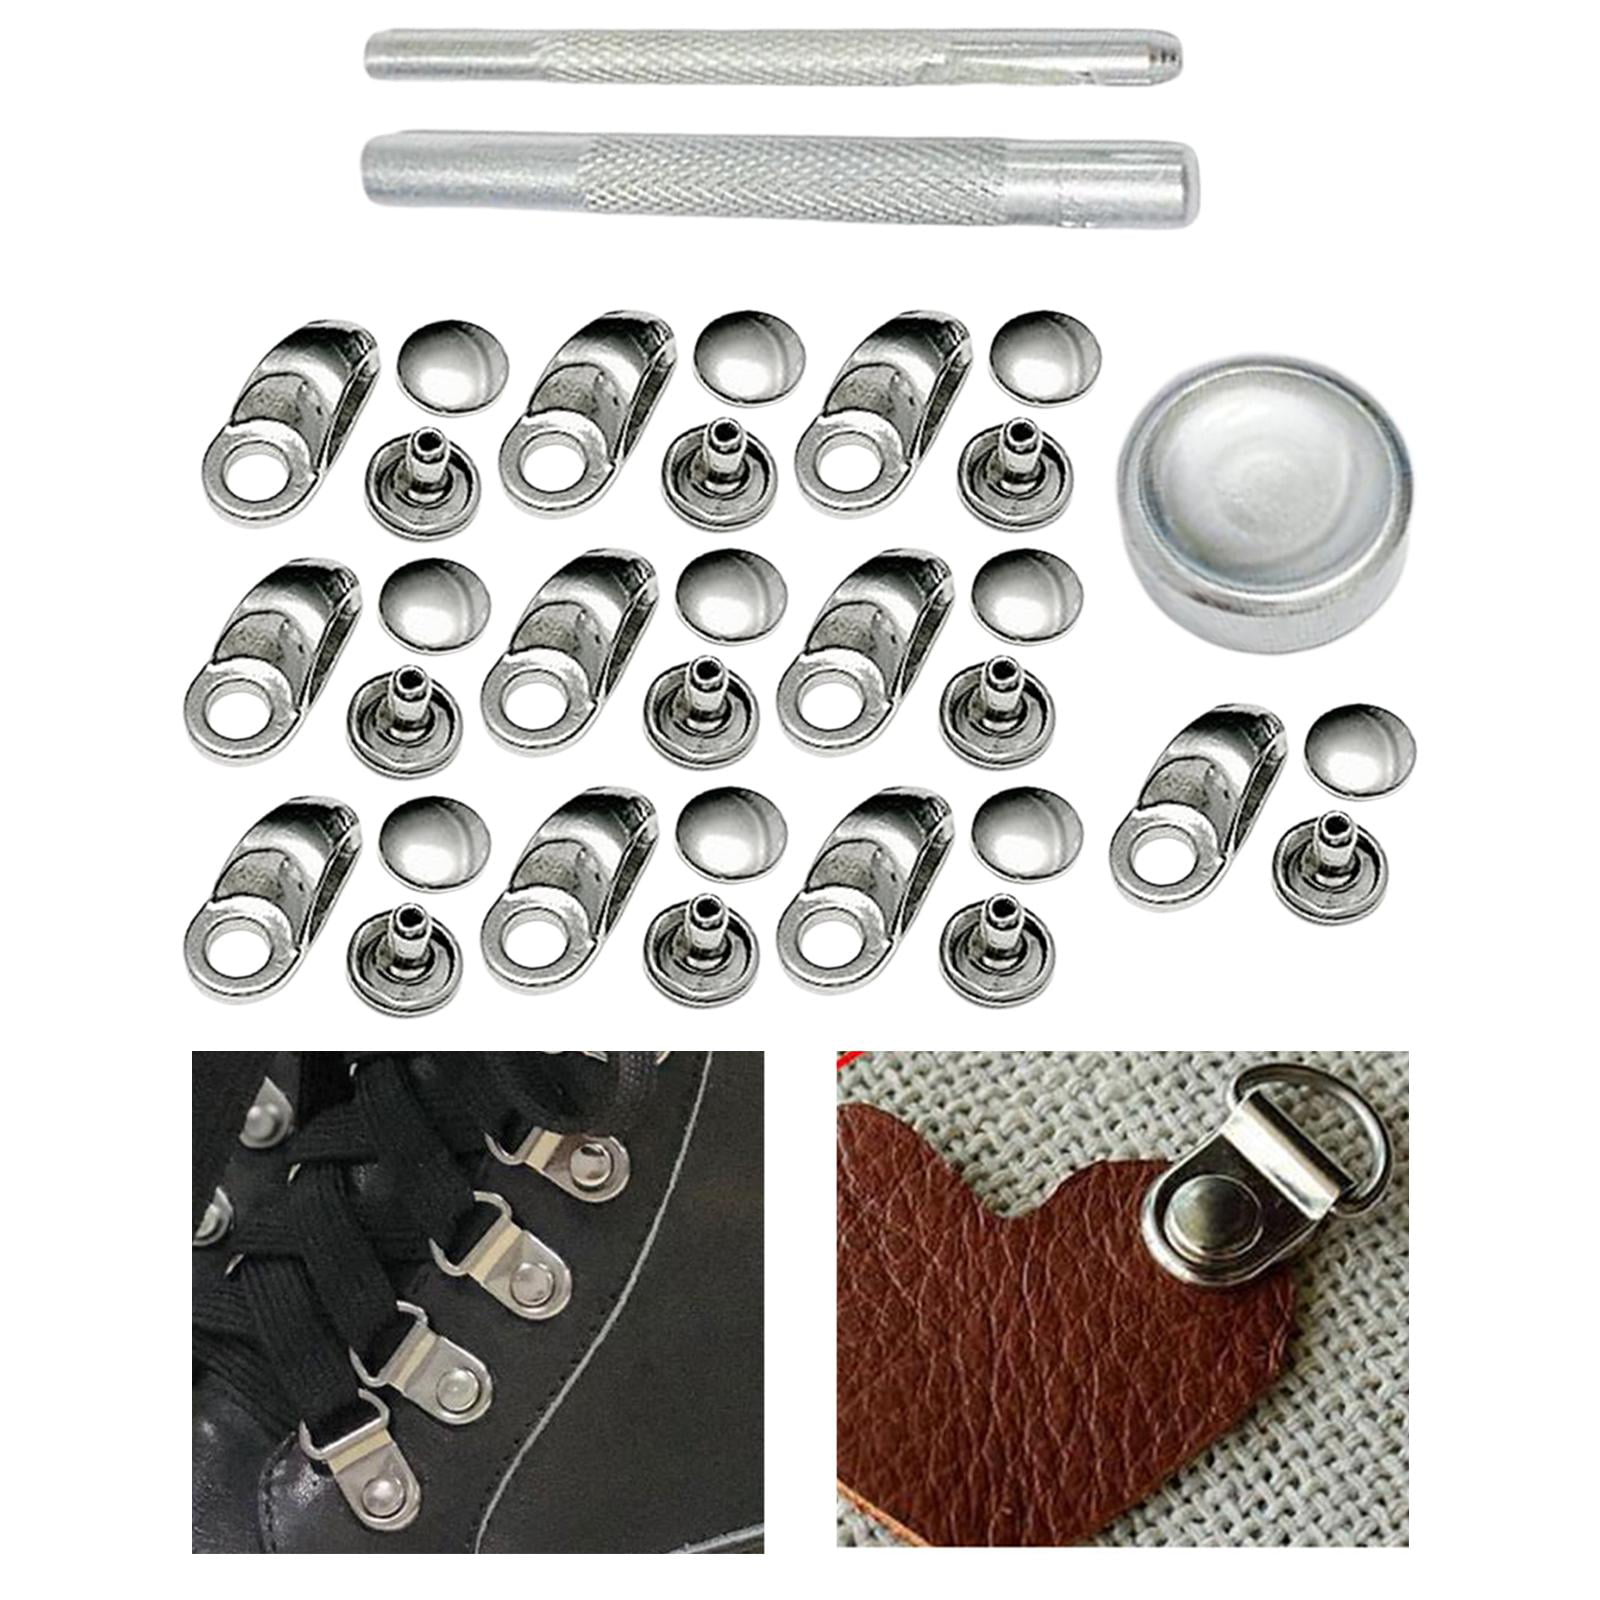 Shoe Boots DIY Buckle Tools Hooks Punch Repair Kit Fixing Supplies Lever  Eyelet Hiking Shoes Eyelets